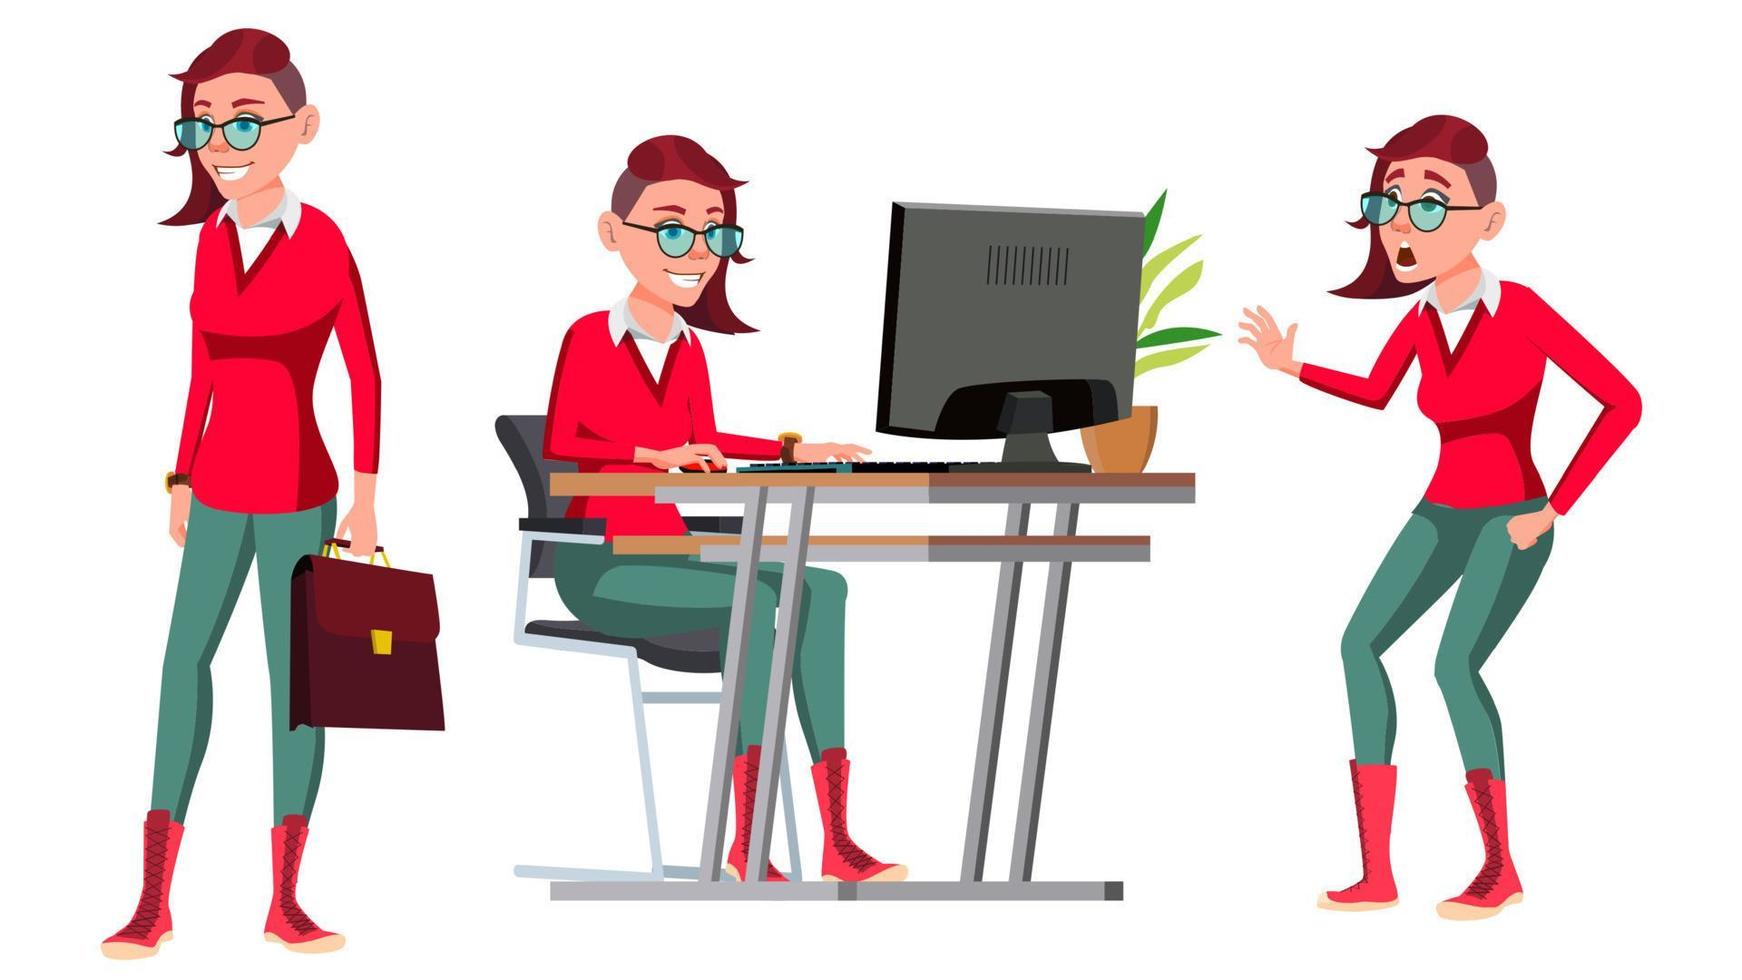 Office Worker Vector. Woman. Successful Officer, Clerk, Servant. In Action. Emo, Freak Hairstyle. Adult Business Woman. Face Emotions, Gestures. Isolated Flat Cartoon Illustration vector